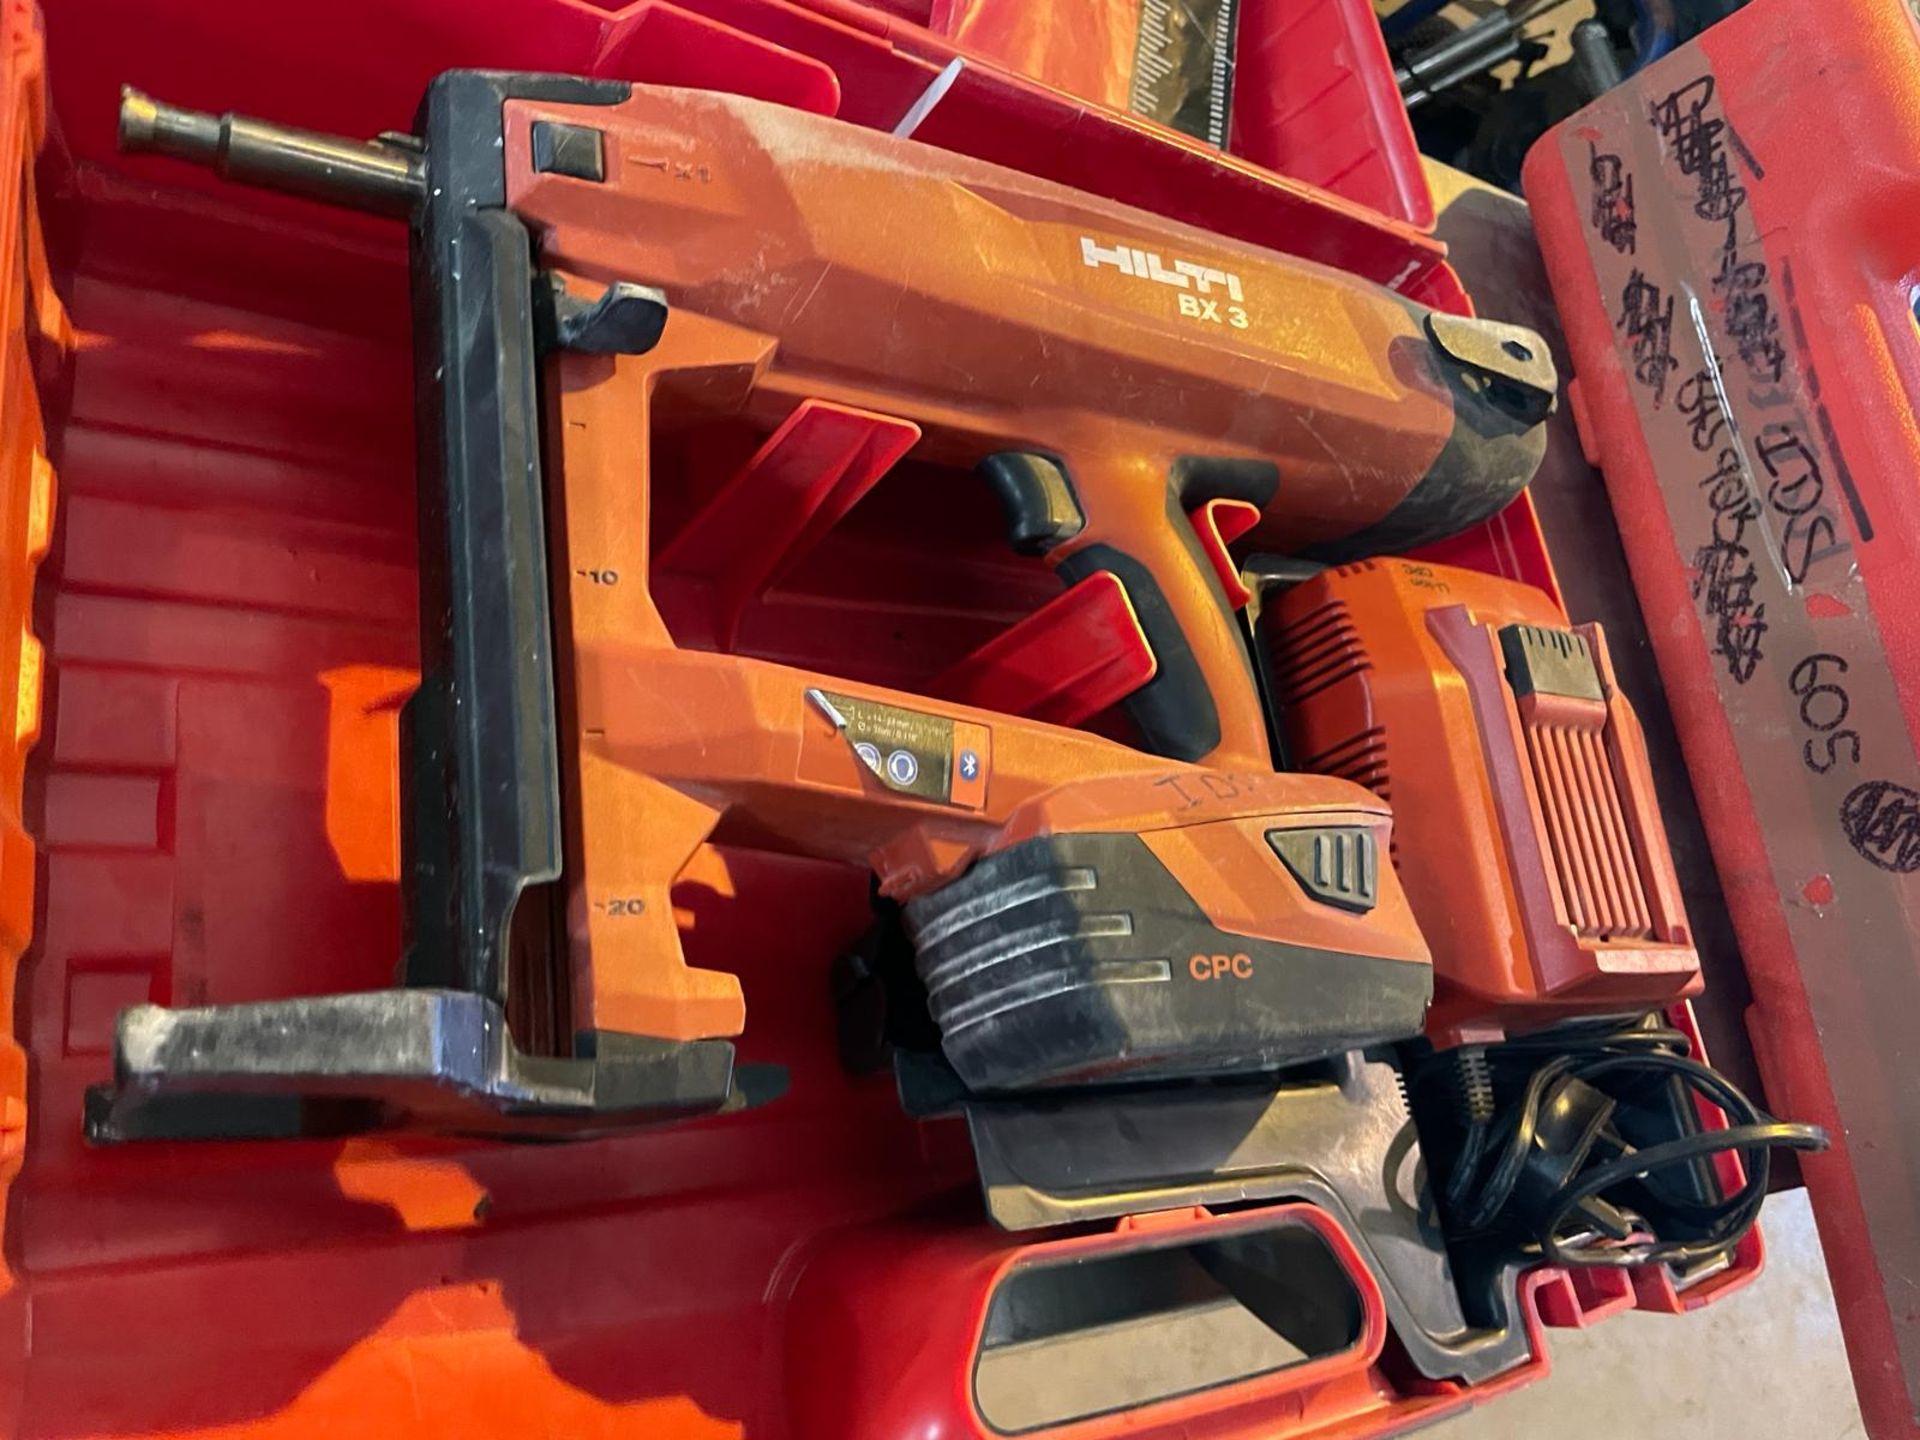 1 x Hilti BX3 Cordless Nail Gun Fastening Tool - Includes Case, Battery and Charger - RRP £3,400 - Image 4 of 7